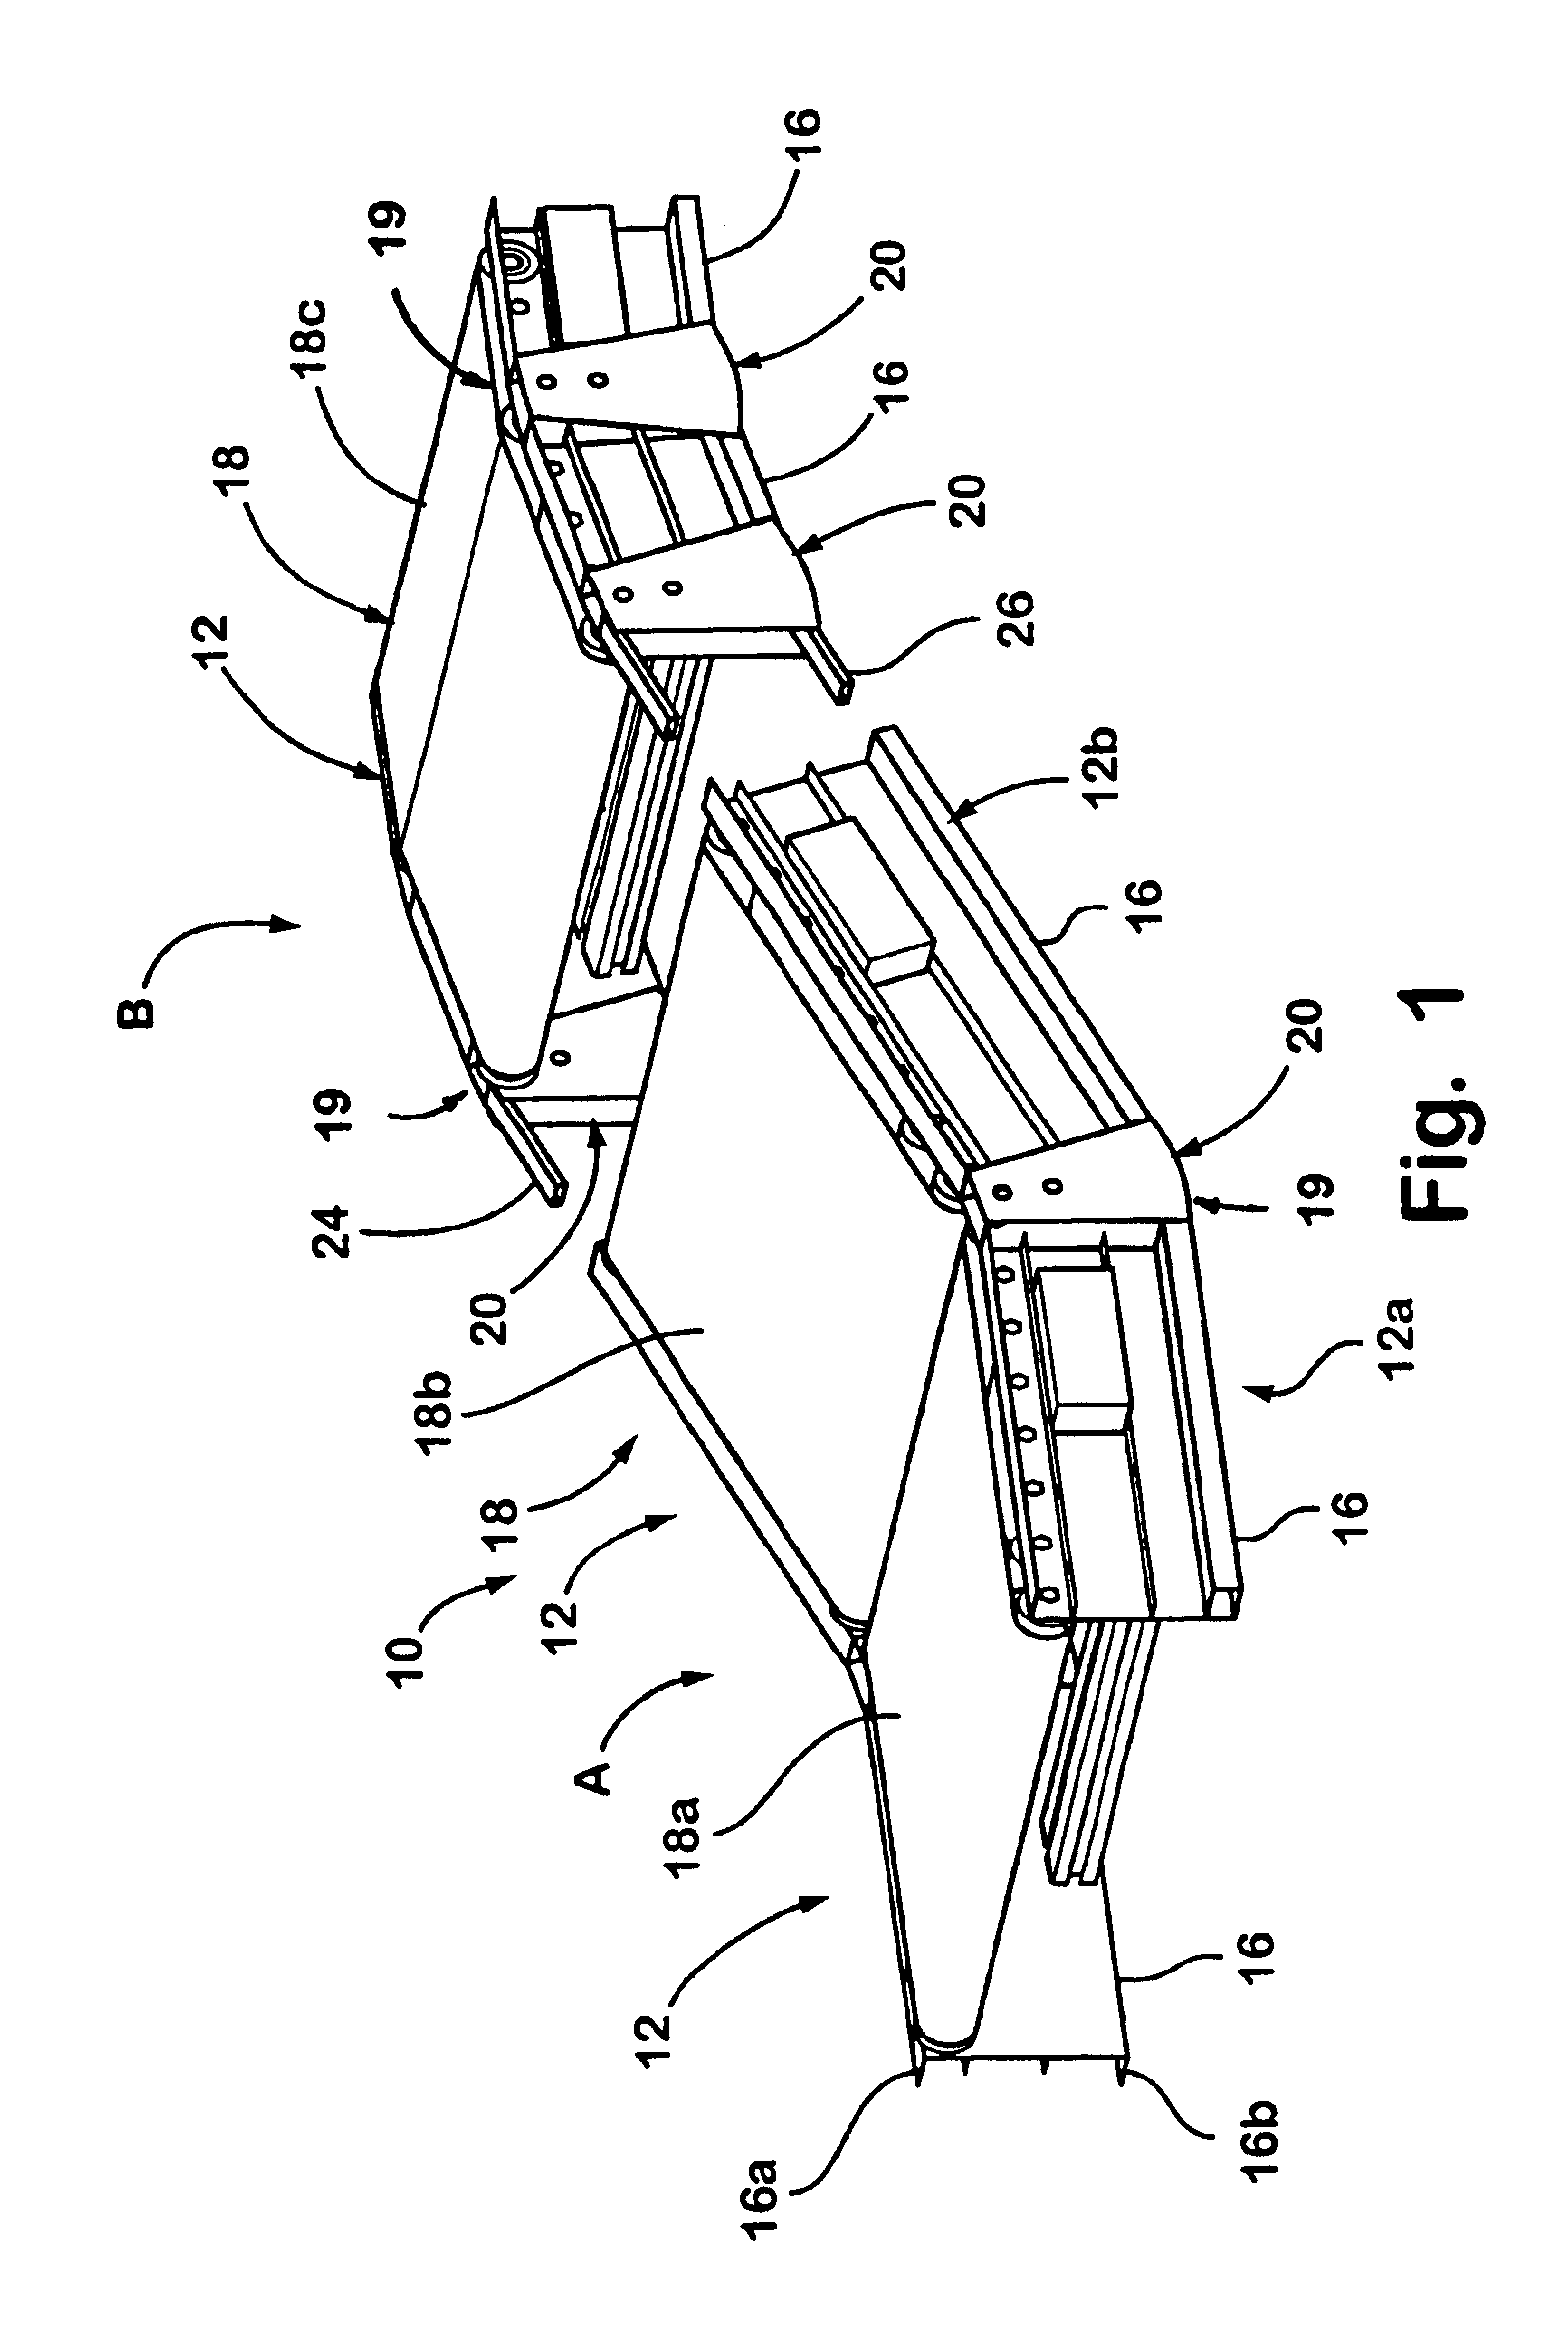 Adjustable connector for nose-over and incline/decline assembly